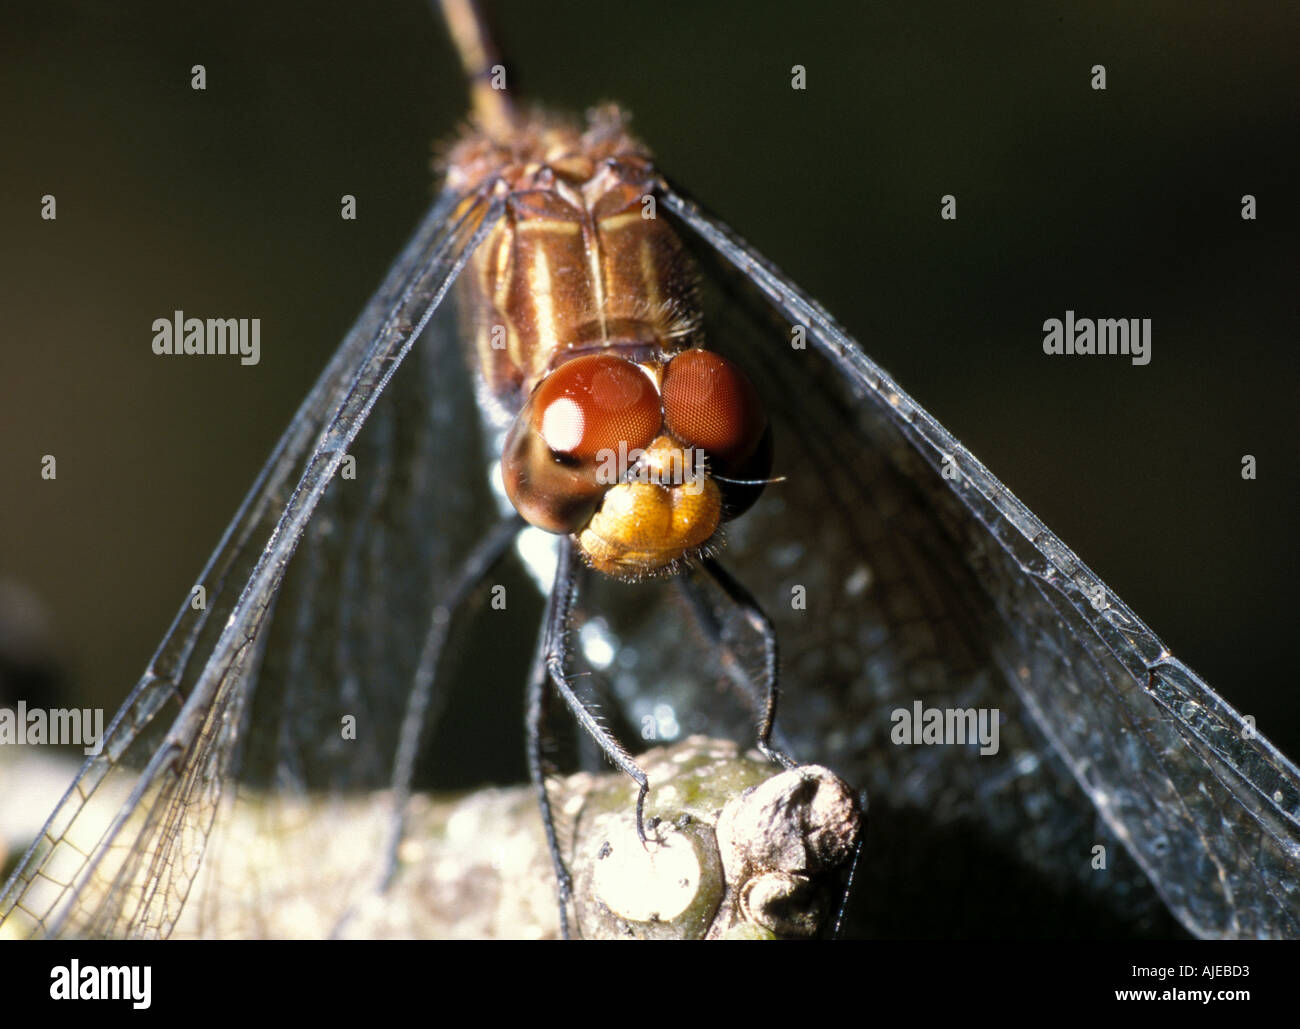 Dragonfly close up showing compound eyes Belize Stock Photo